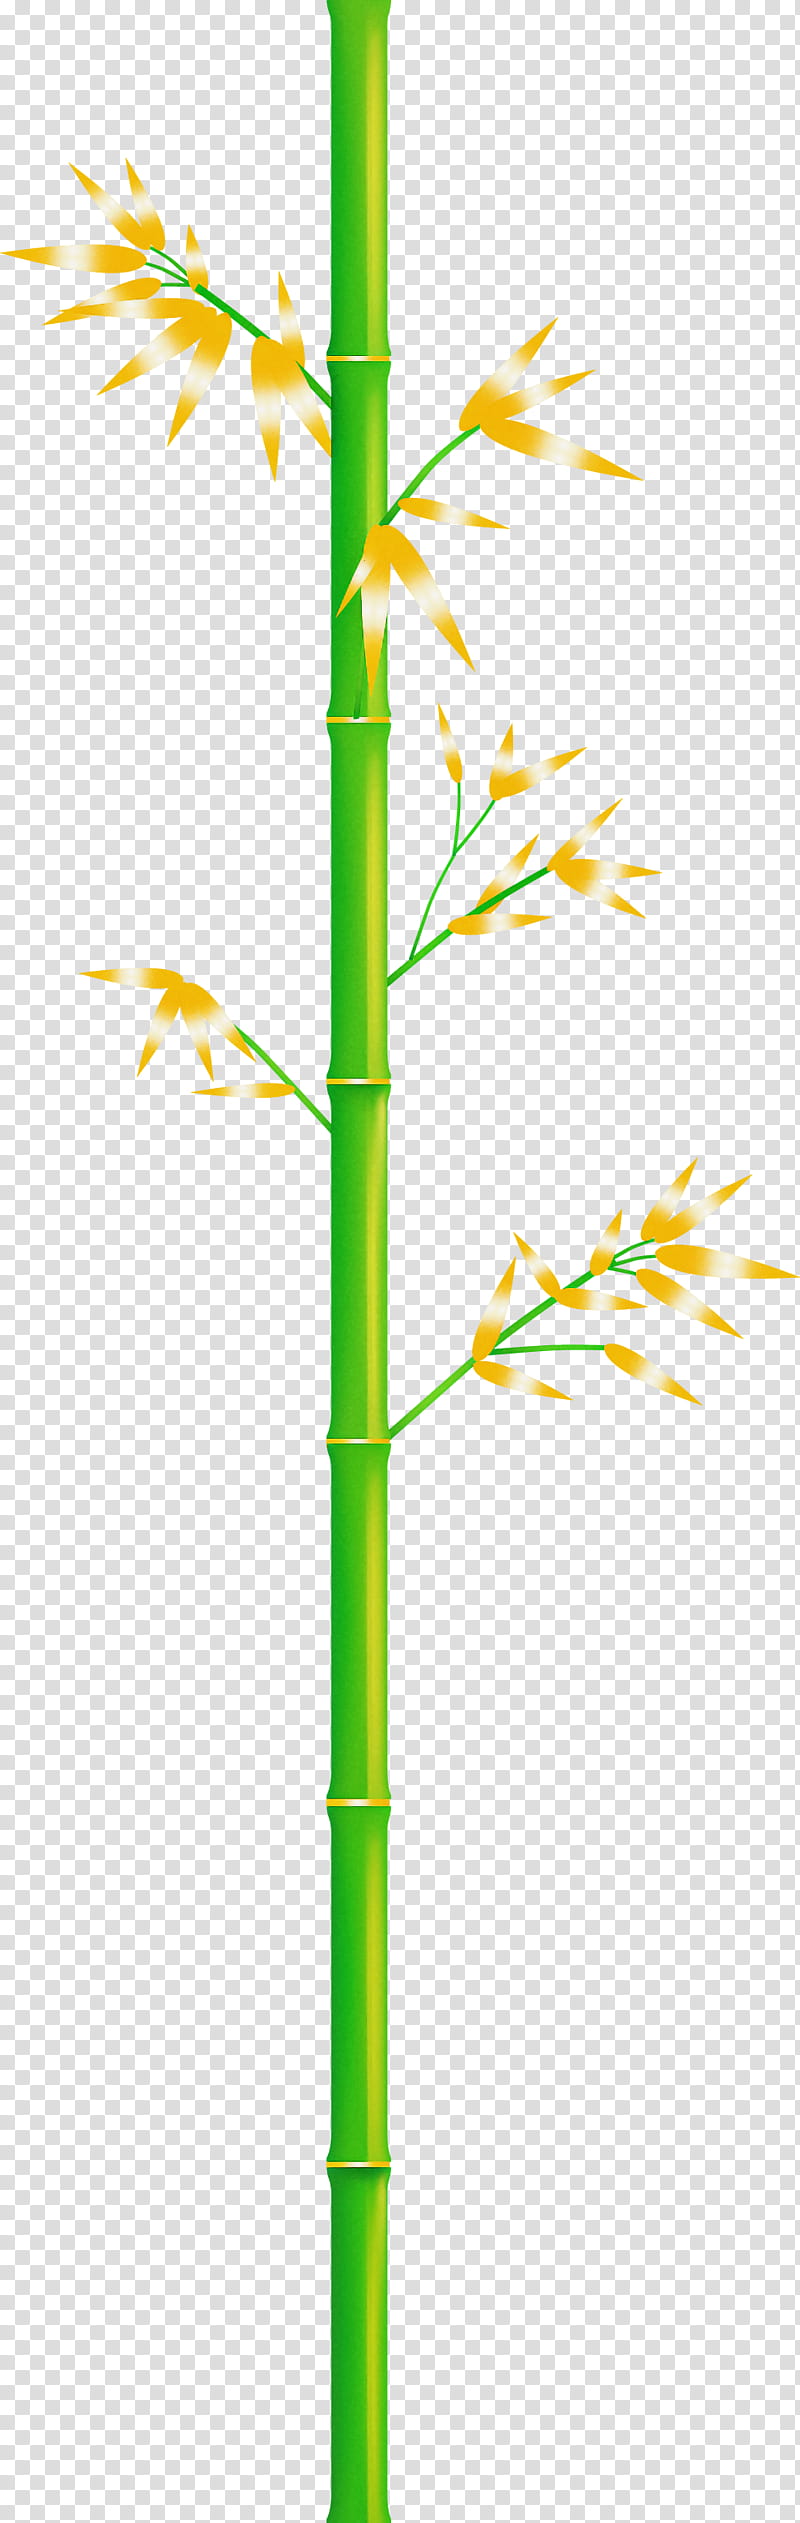 bamboo leaf, Green, Yellow, Plant Stem, Grass Family, Elymus Repens, Branch transparent background PNG clipart